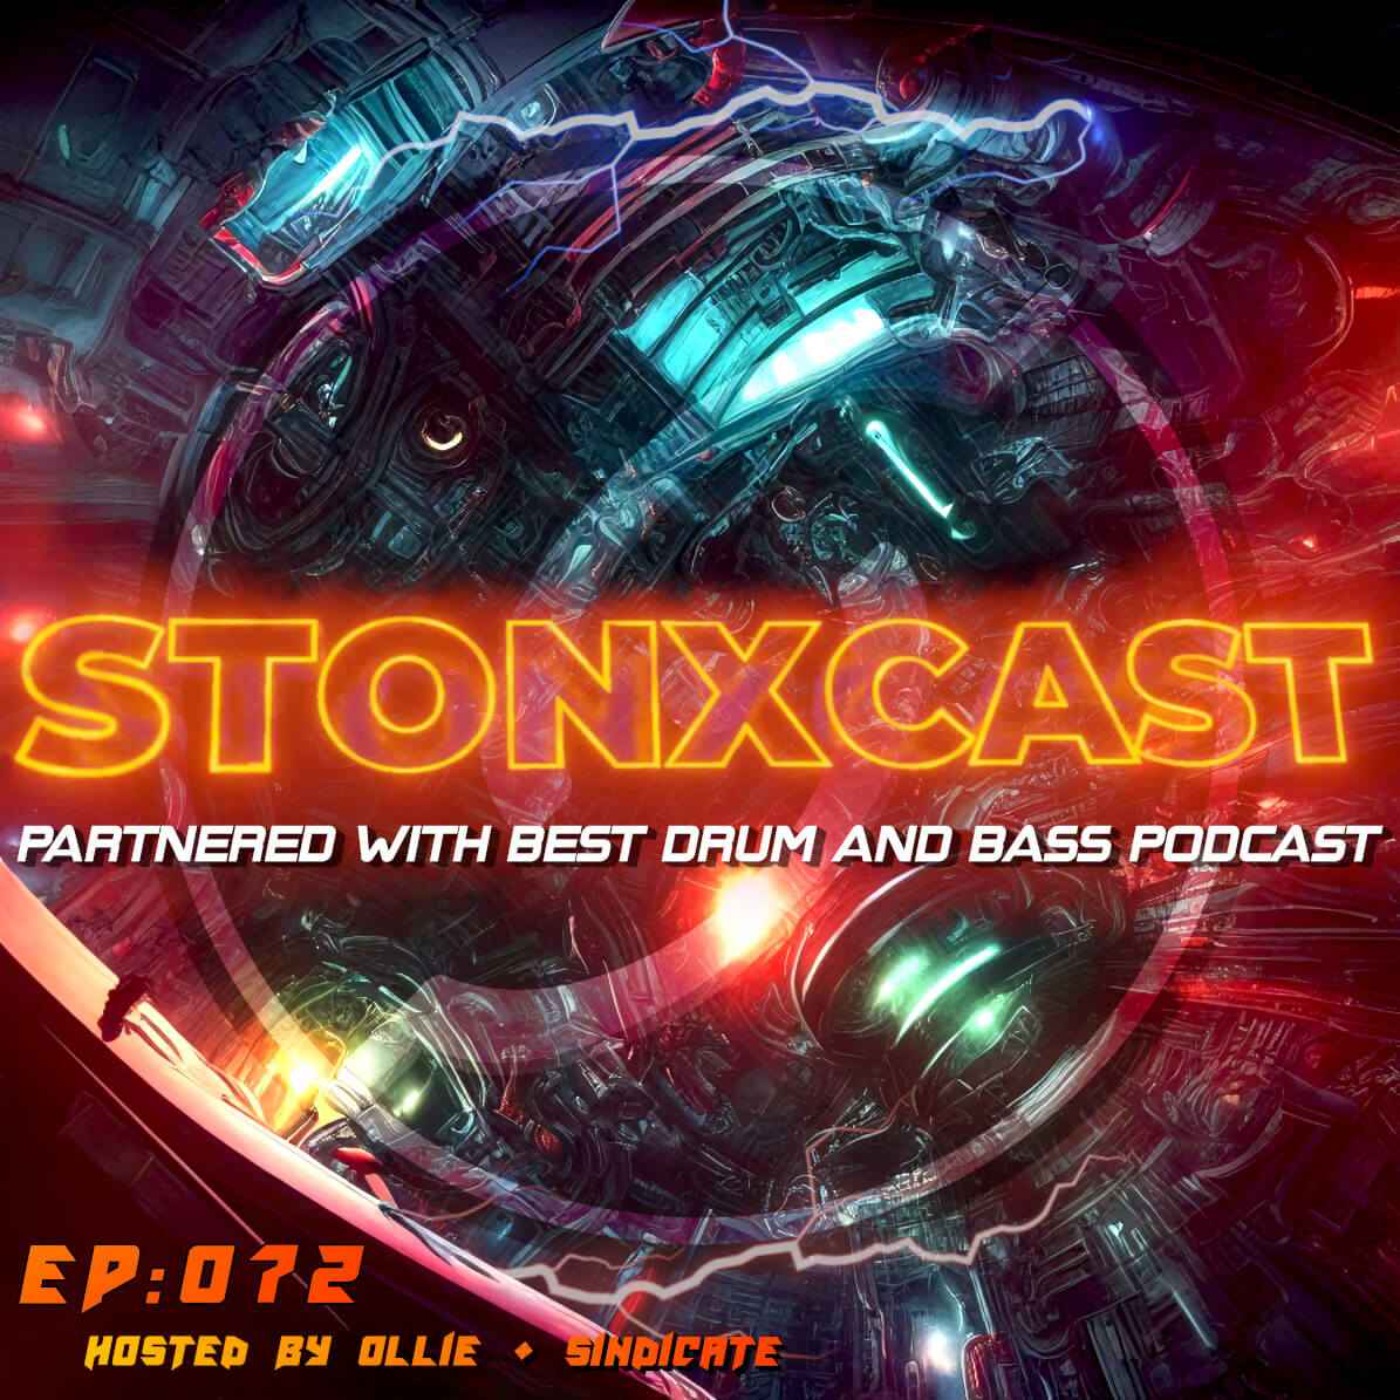 Stonxcast EP:072 - Hosted by Ollie & Sindicate Artwork